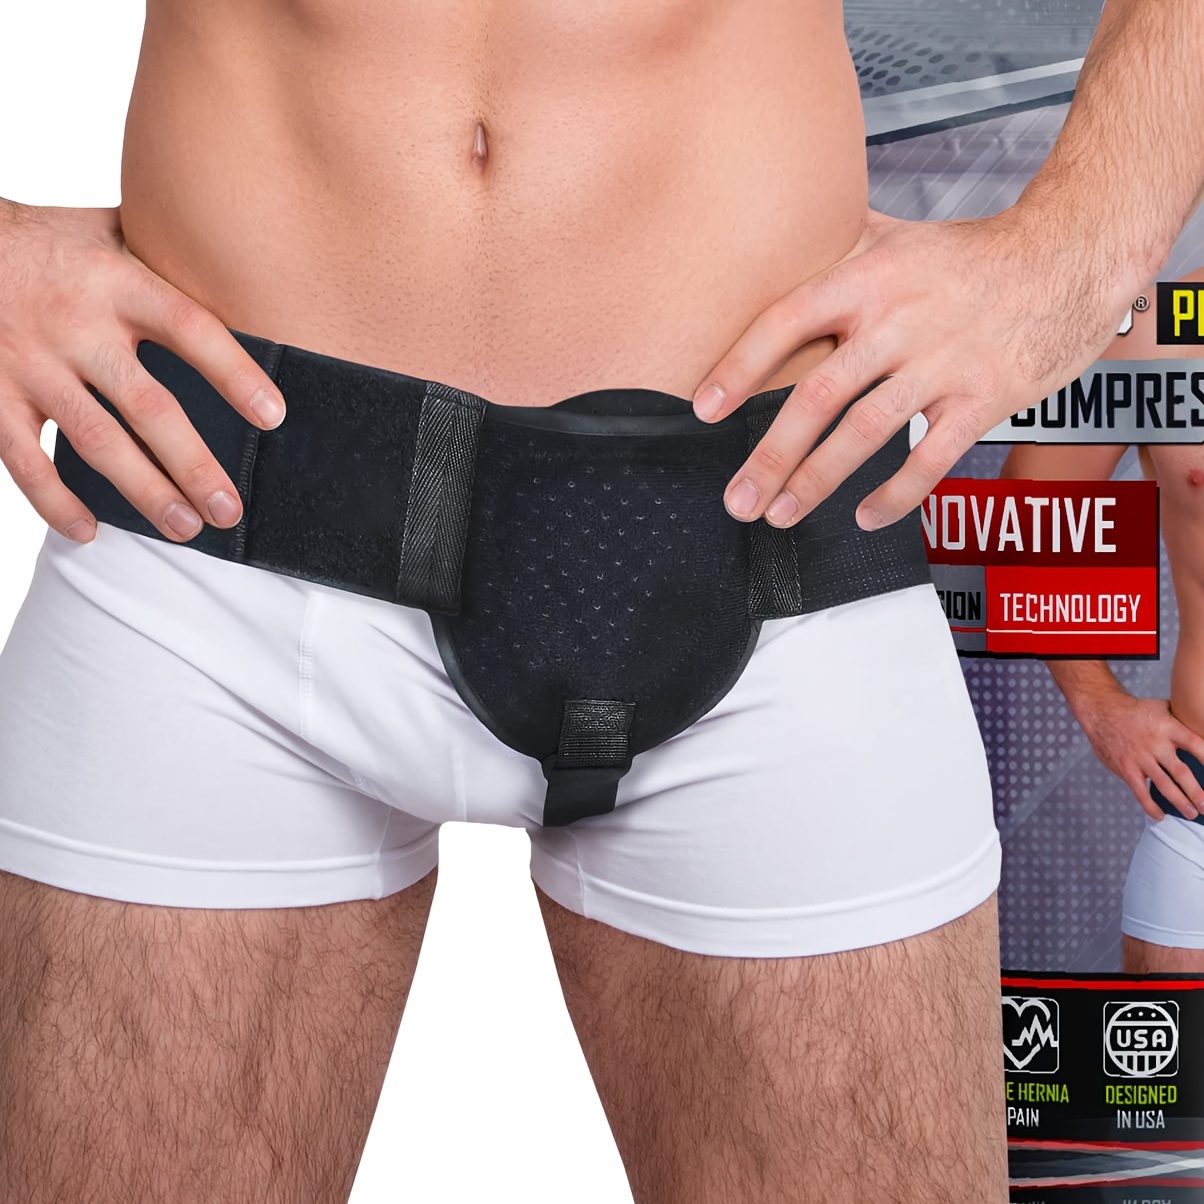 Adult Hernia Belt Truss For Groin Or Sports Hernia Support Support Pain  Relief Recovery Belt With 1 Removable Compression Pad (1pcs - Black)